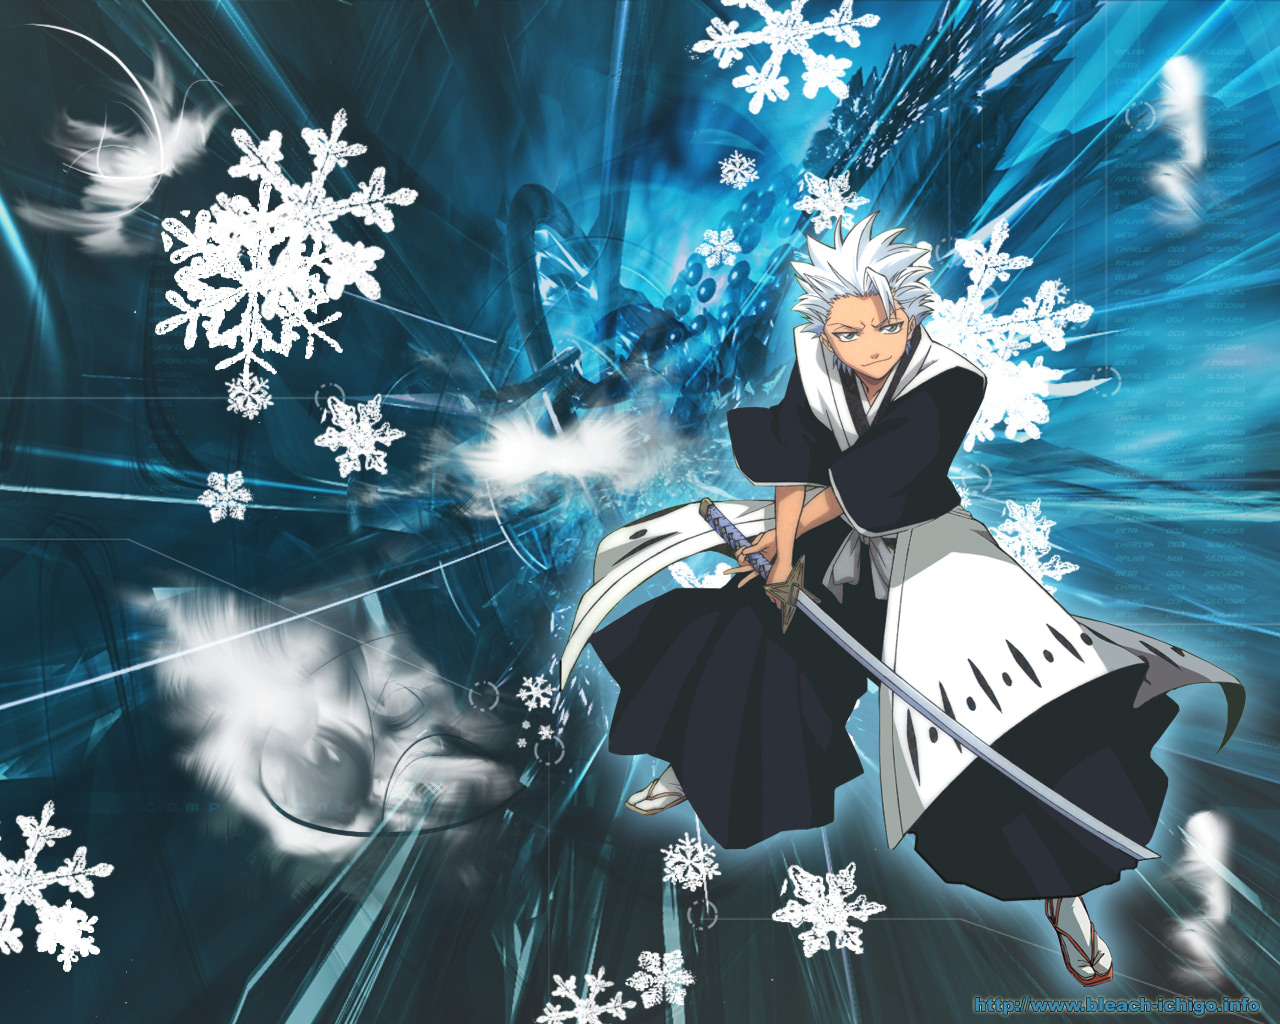 Image Website Cute Bleach Hitsugaya S Bankai Picture Colection